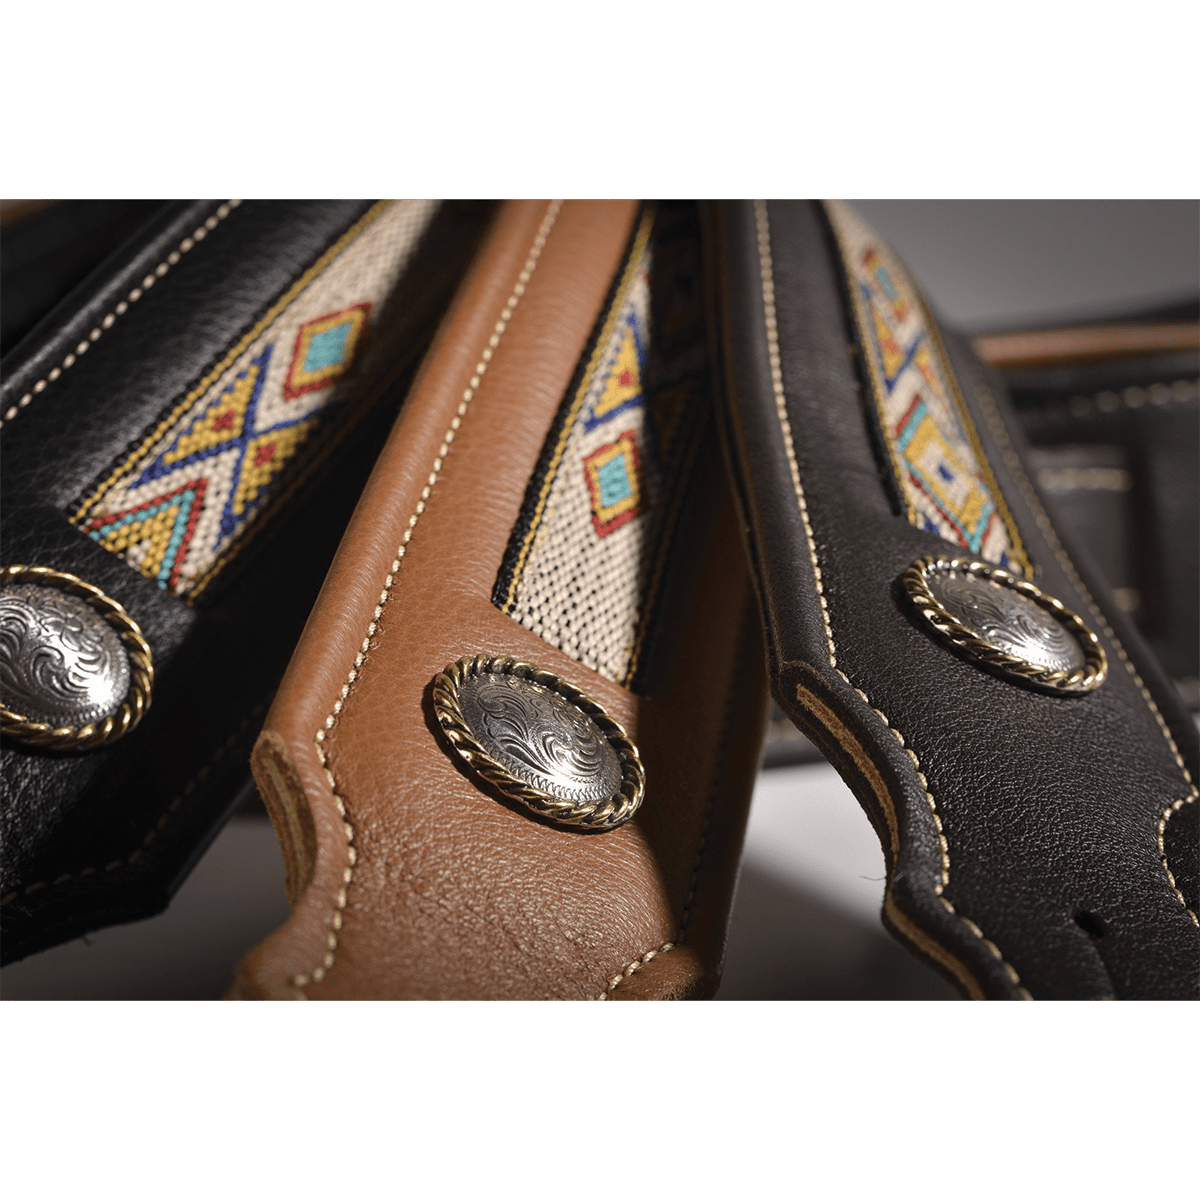 Franklin 2" Southwest Padded Glove Leather with Hitch Weave & Concho